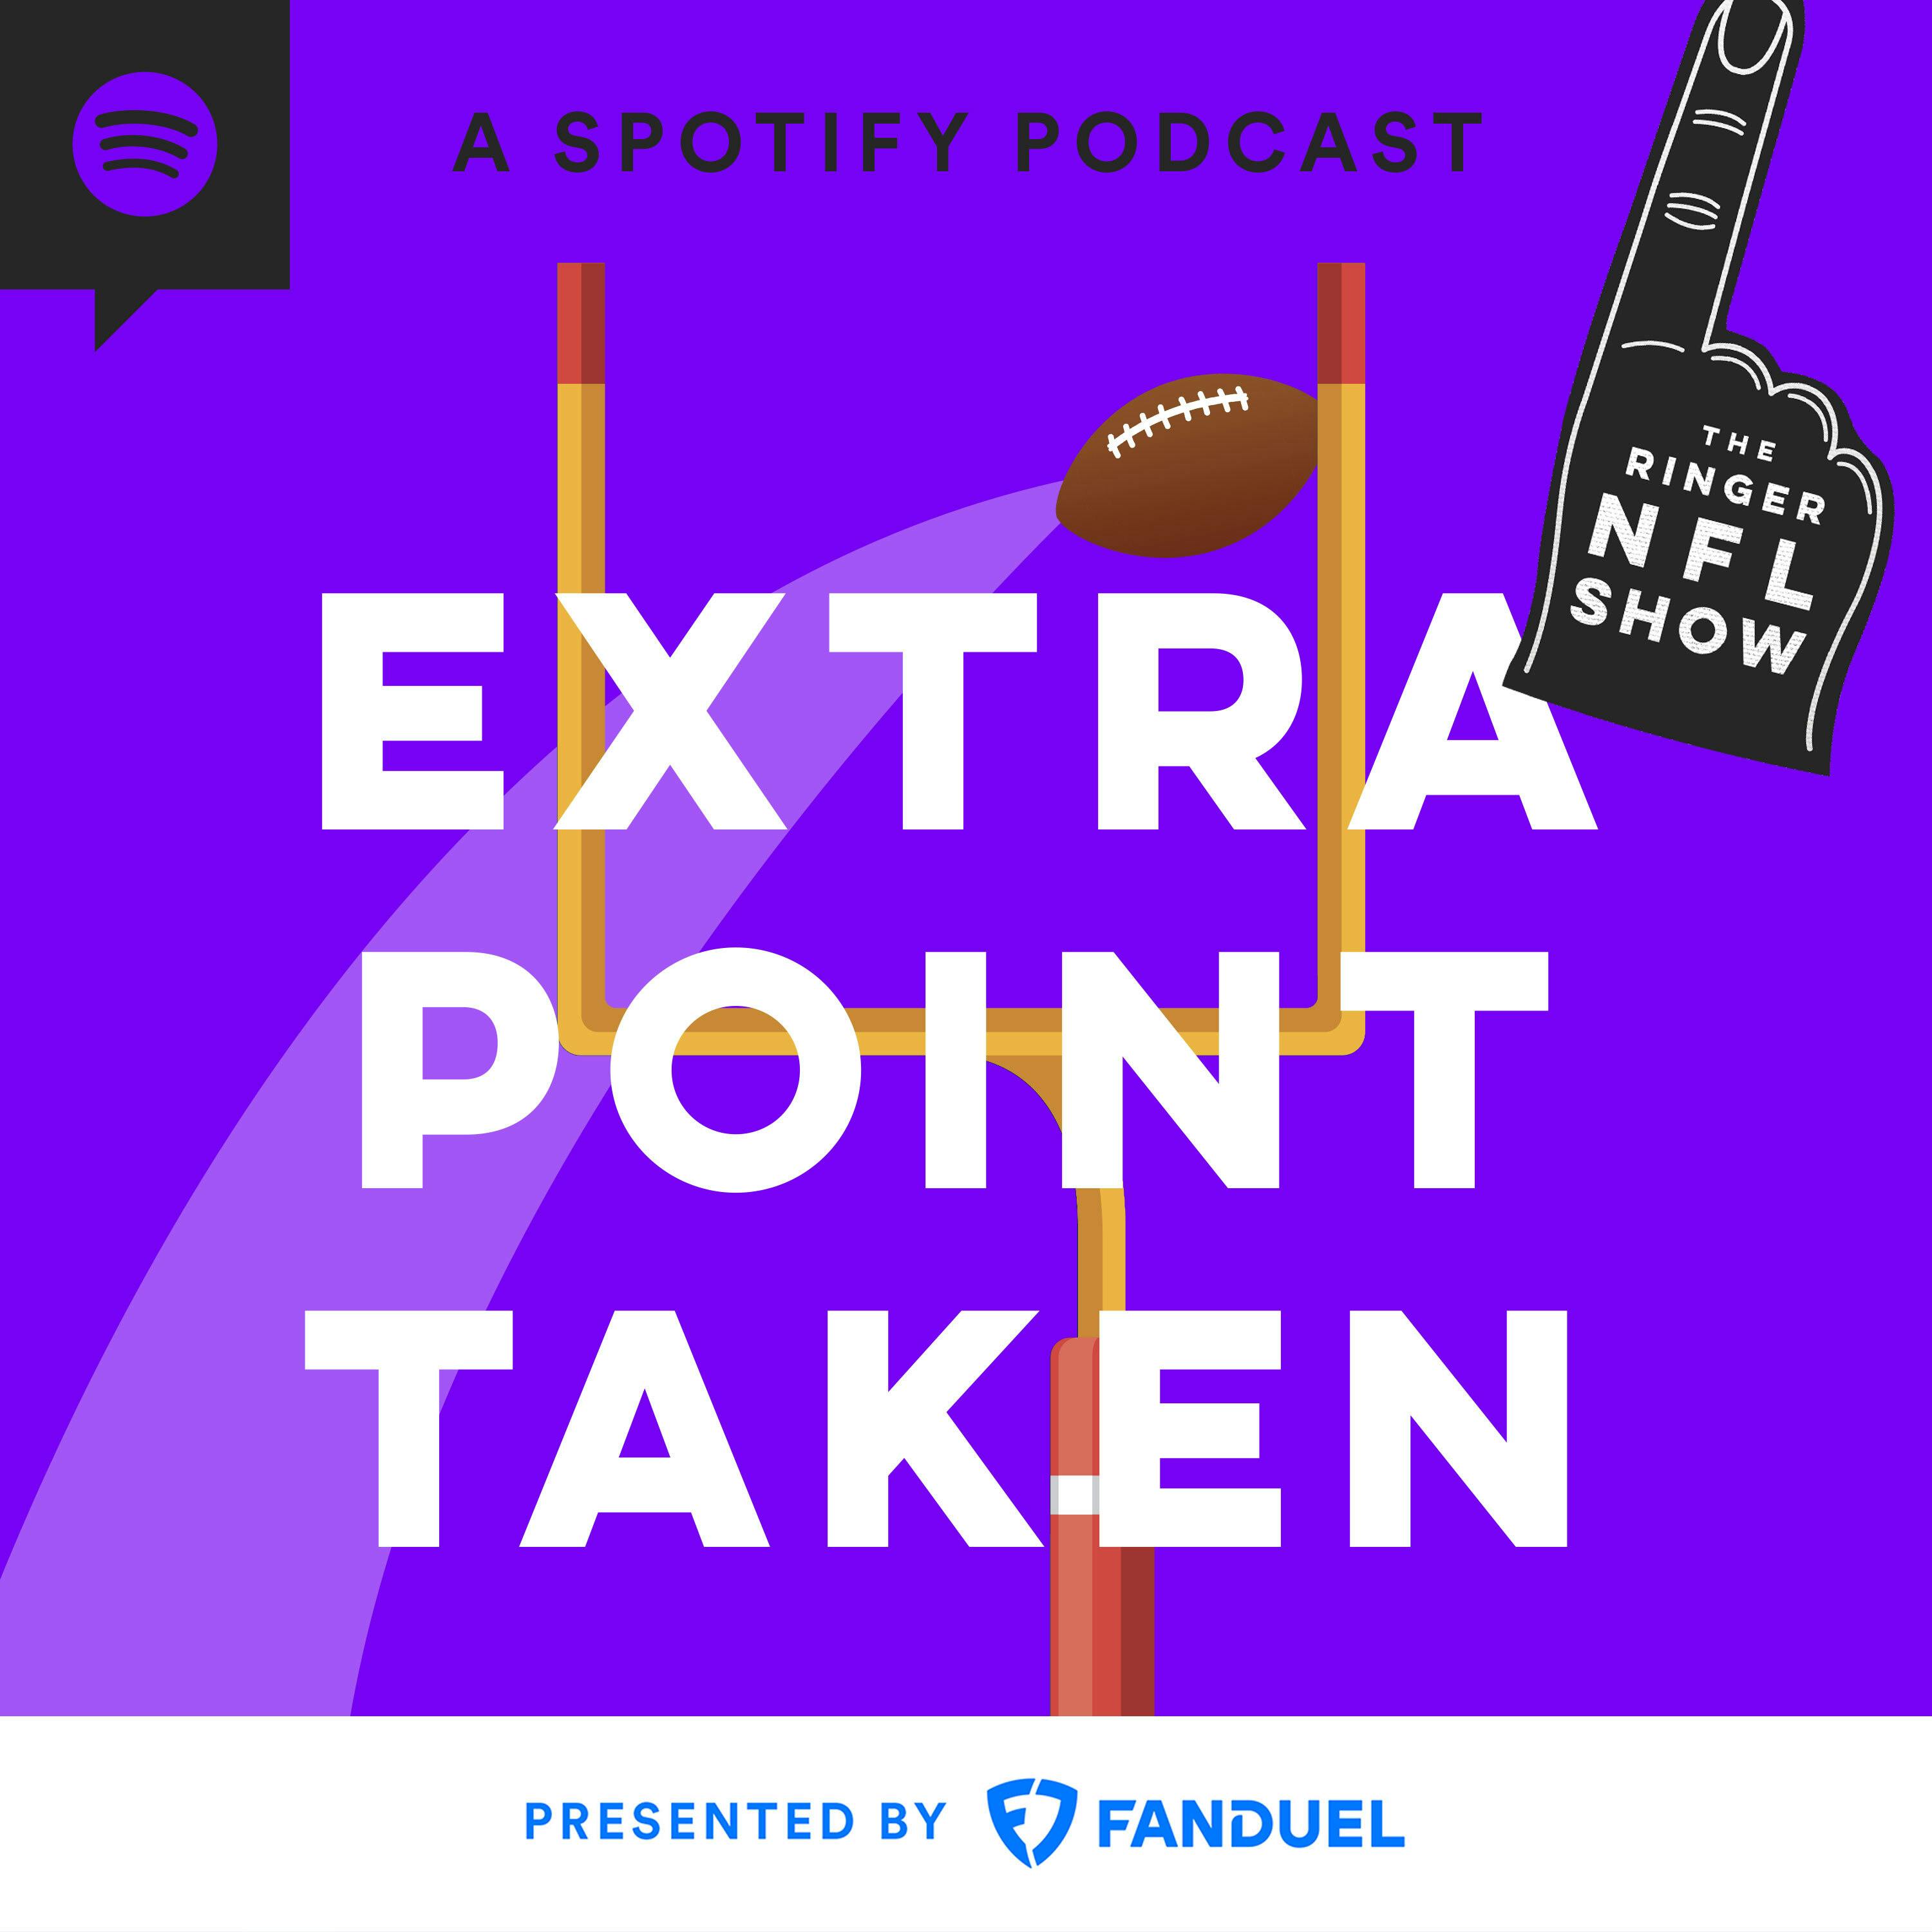 Don’t Count Out the Bengals, D’Andre Swift Keeps the Eagles' Arrow Pointing Up, and More Big Takeaways From Week 3 | Extra Point Taken